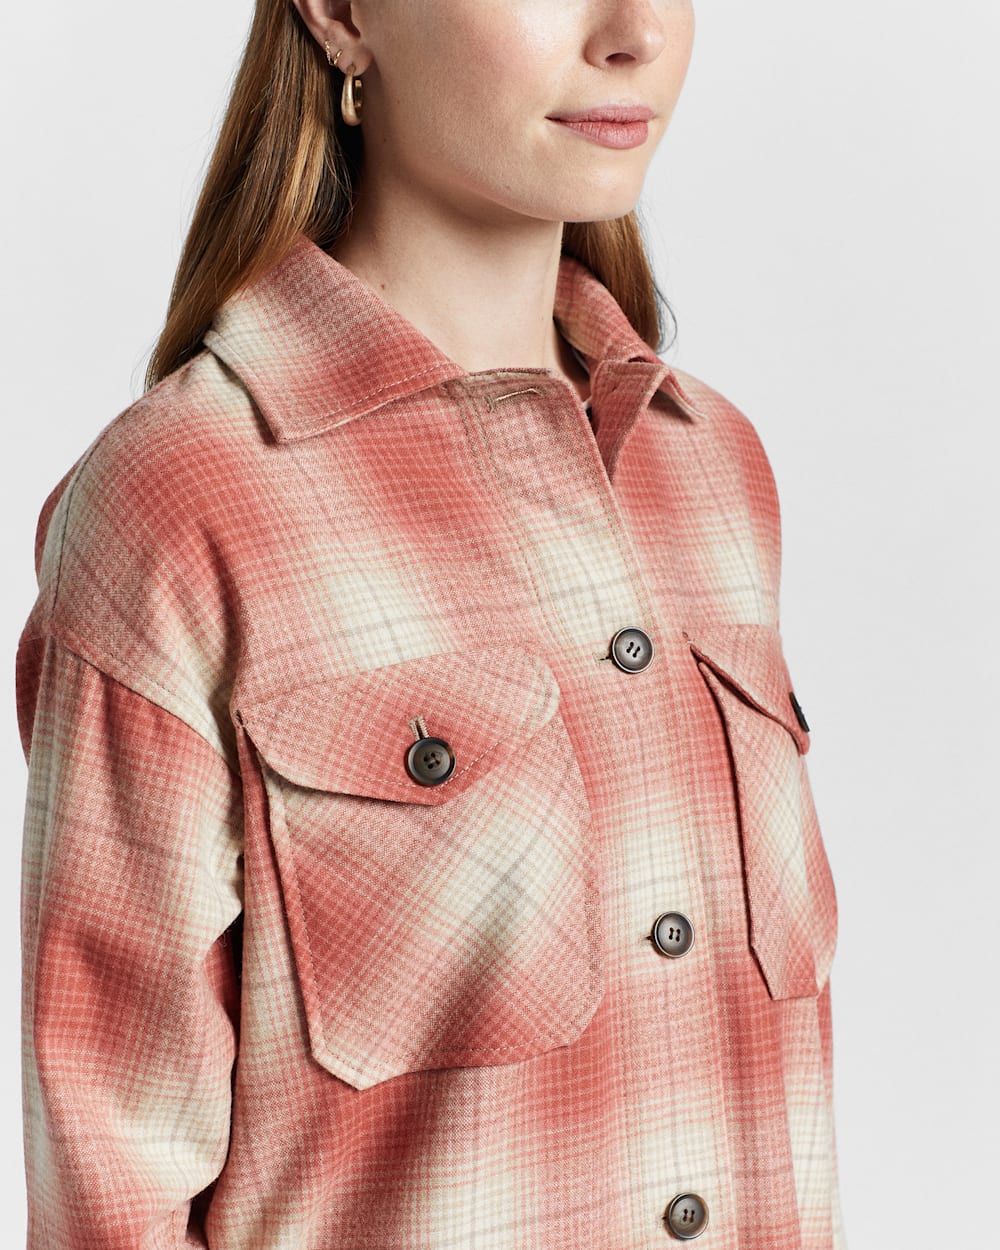 ALTERNATE VIEW OF WOMEN'S WOOL OVERSHIRT IN CORAL OMBRE PLAID image number 5